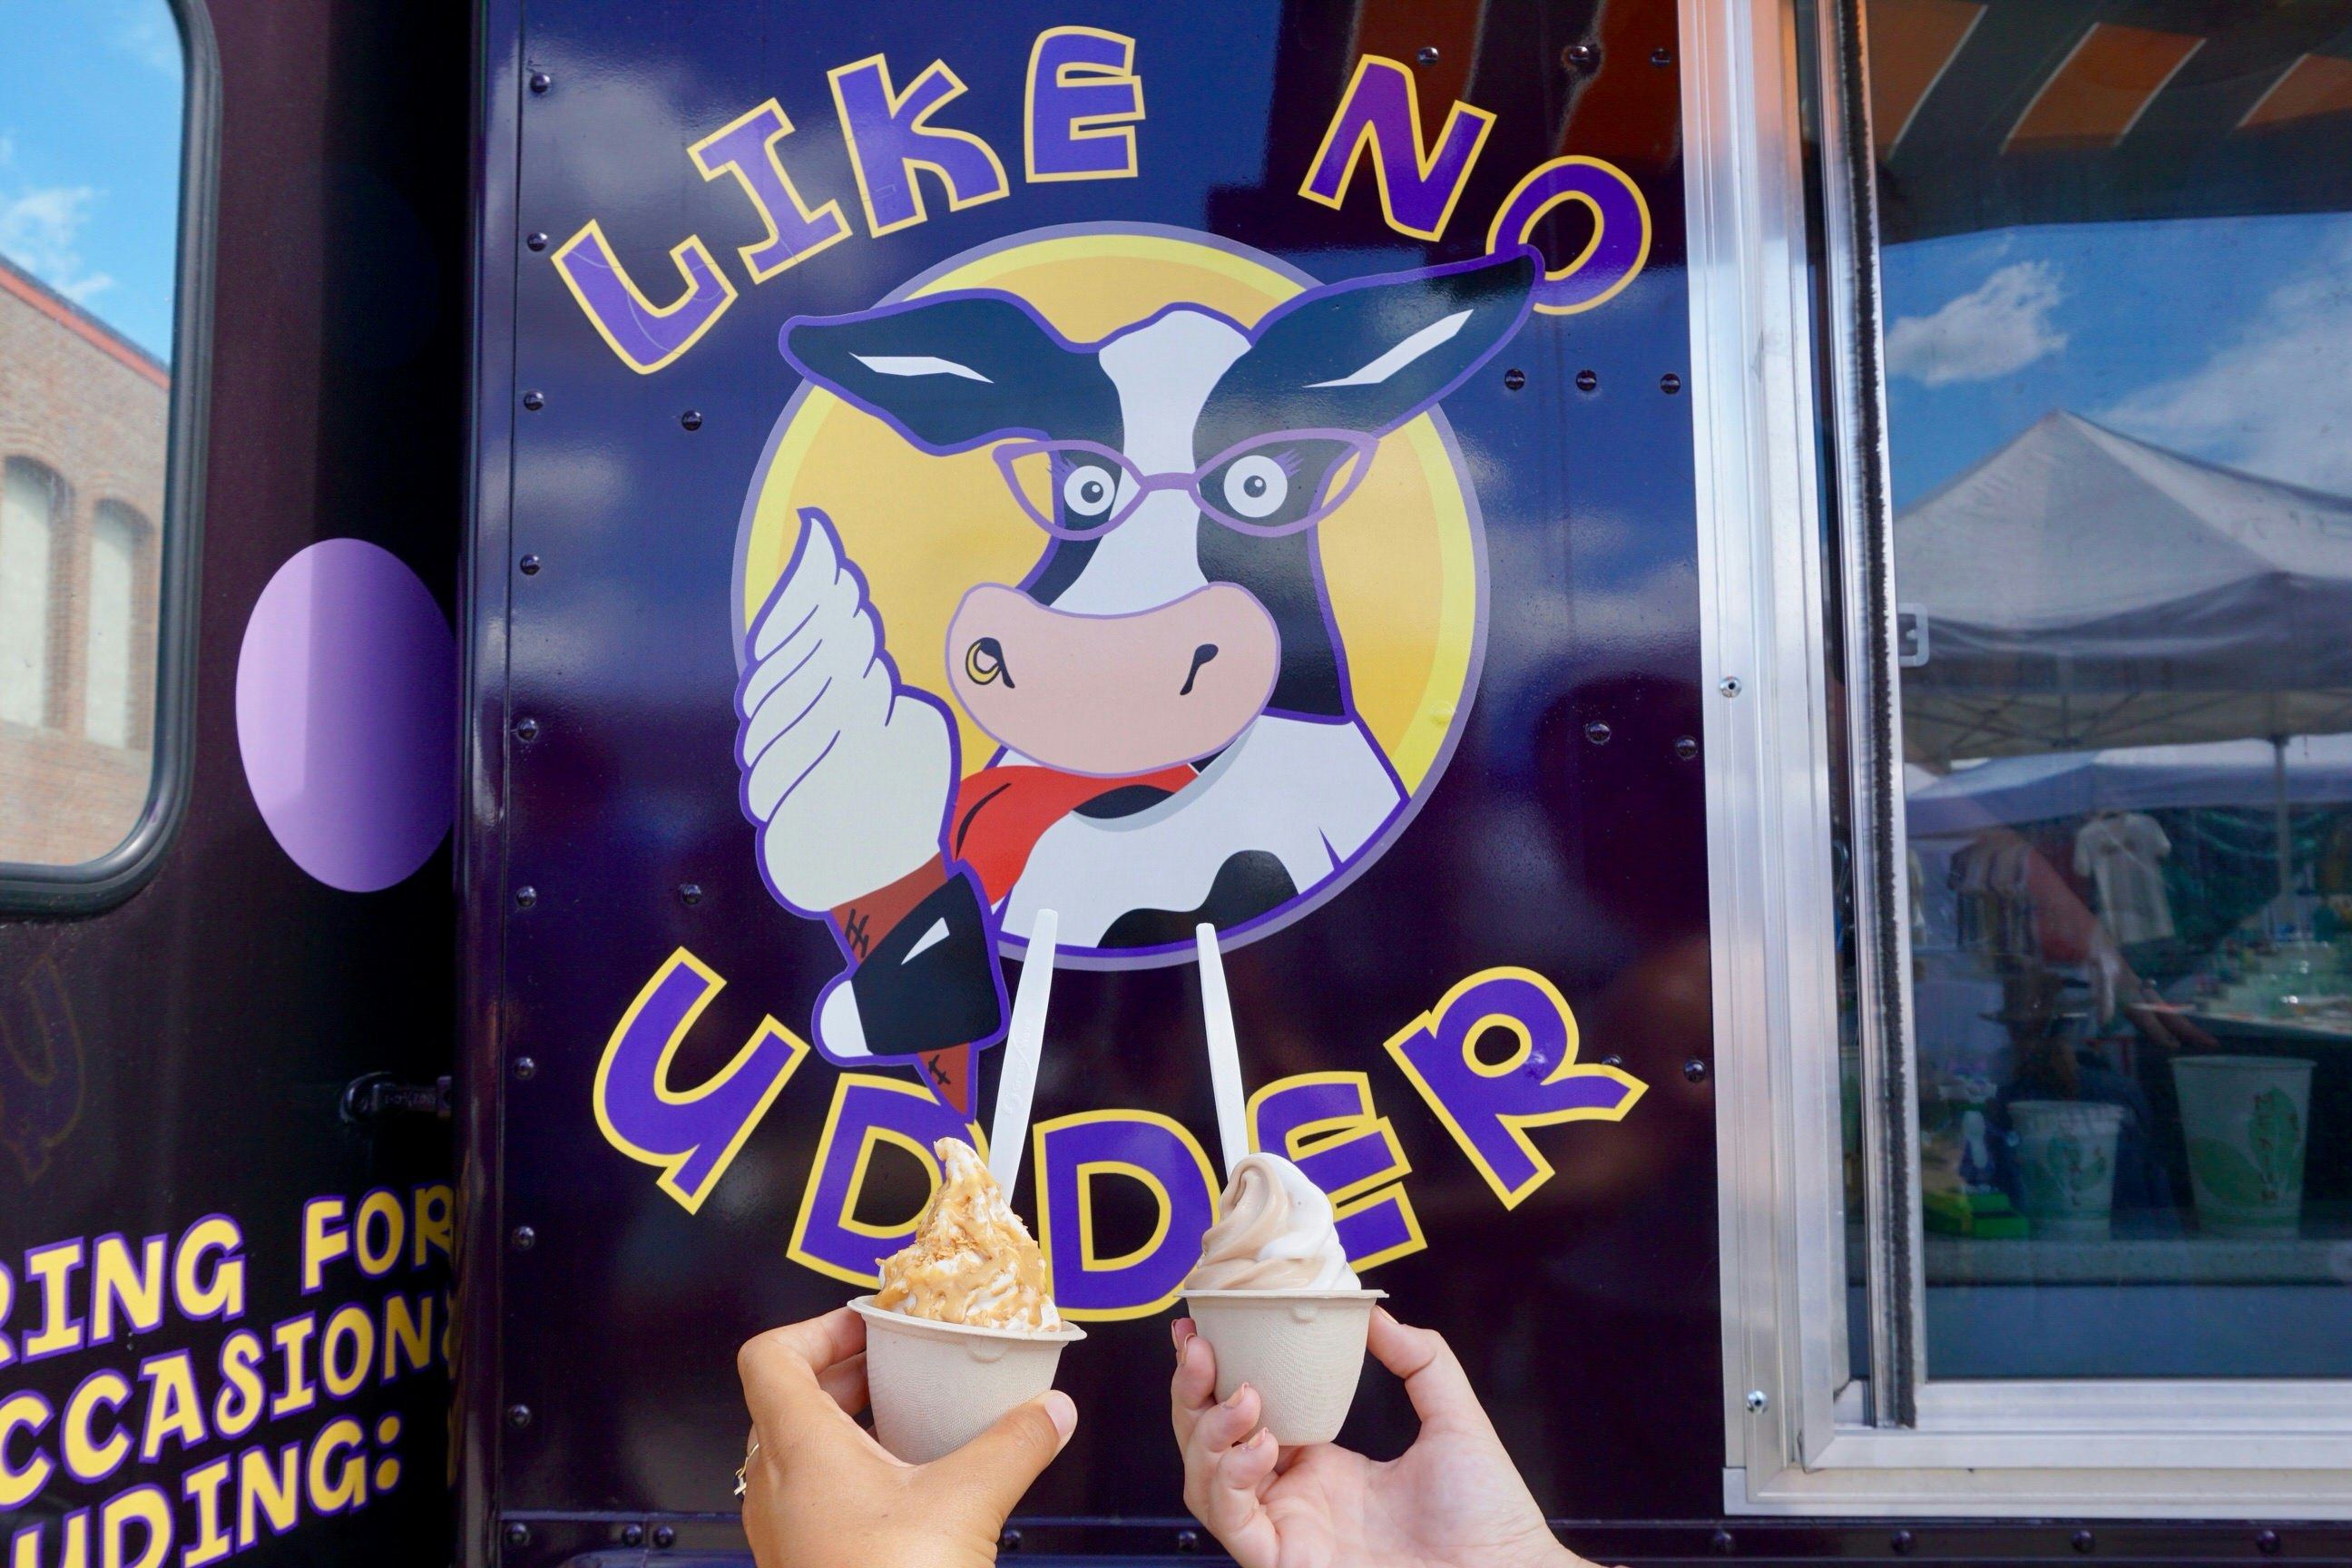 Two people are holding up servings of vegan soft-serve ice cream in the frame - only their hands can be seen in front of the 'Like No Udder' sign on the side of an ice-cream truck. The sign is a cartoon cow wearing glasses and licking an ice-cream cone.